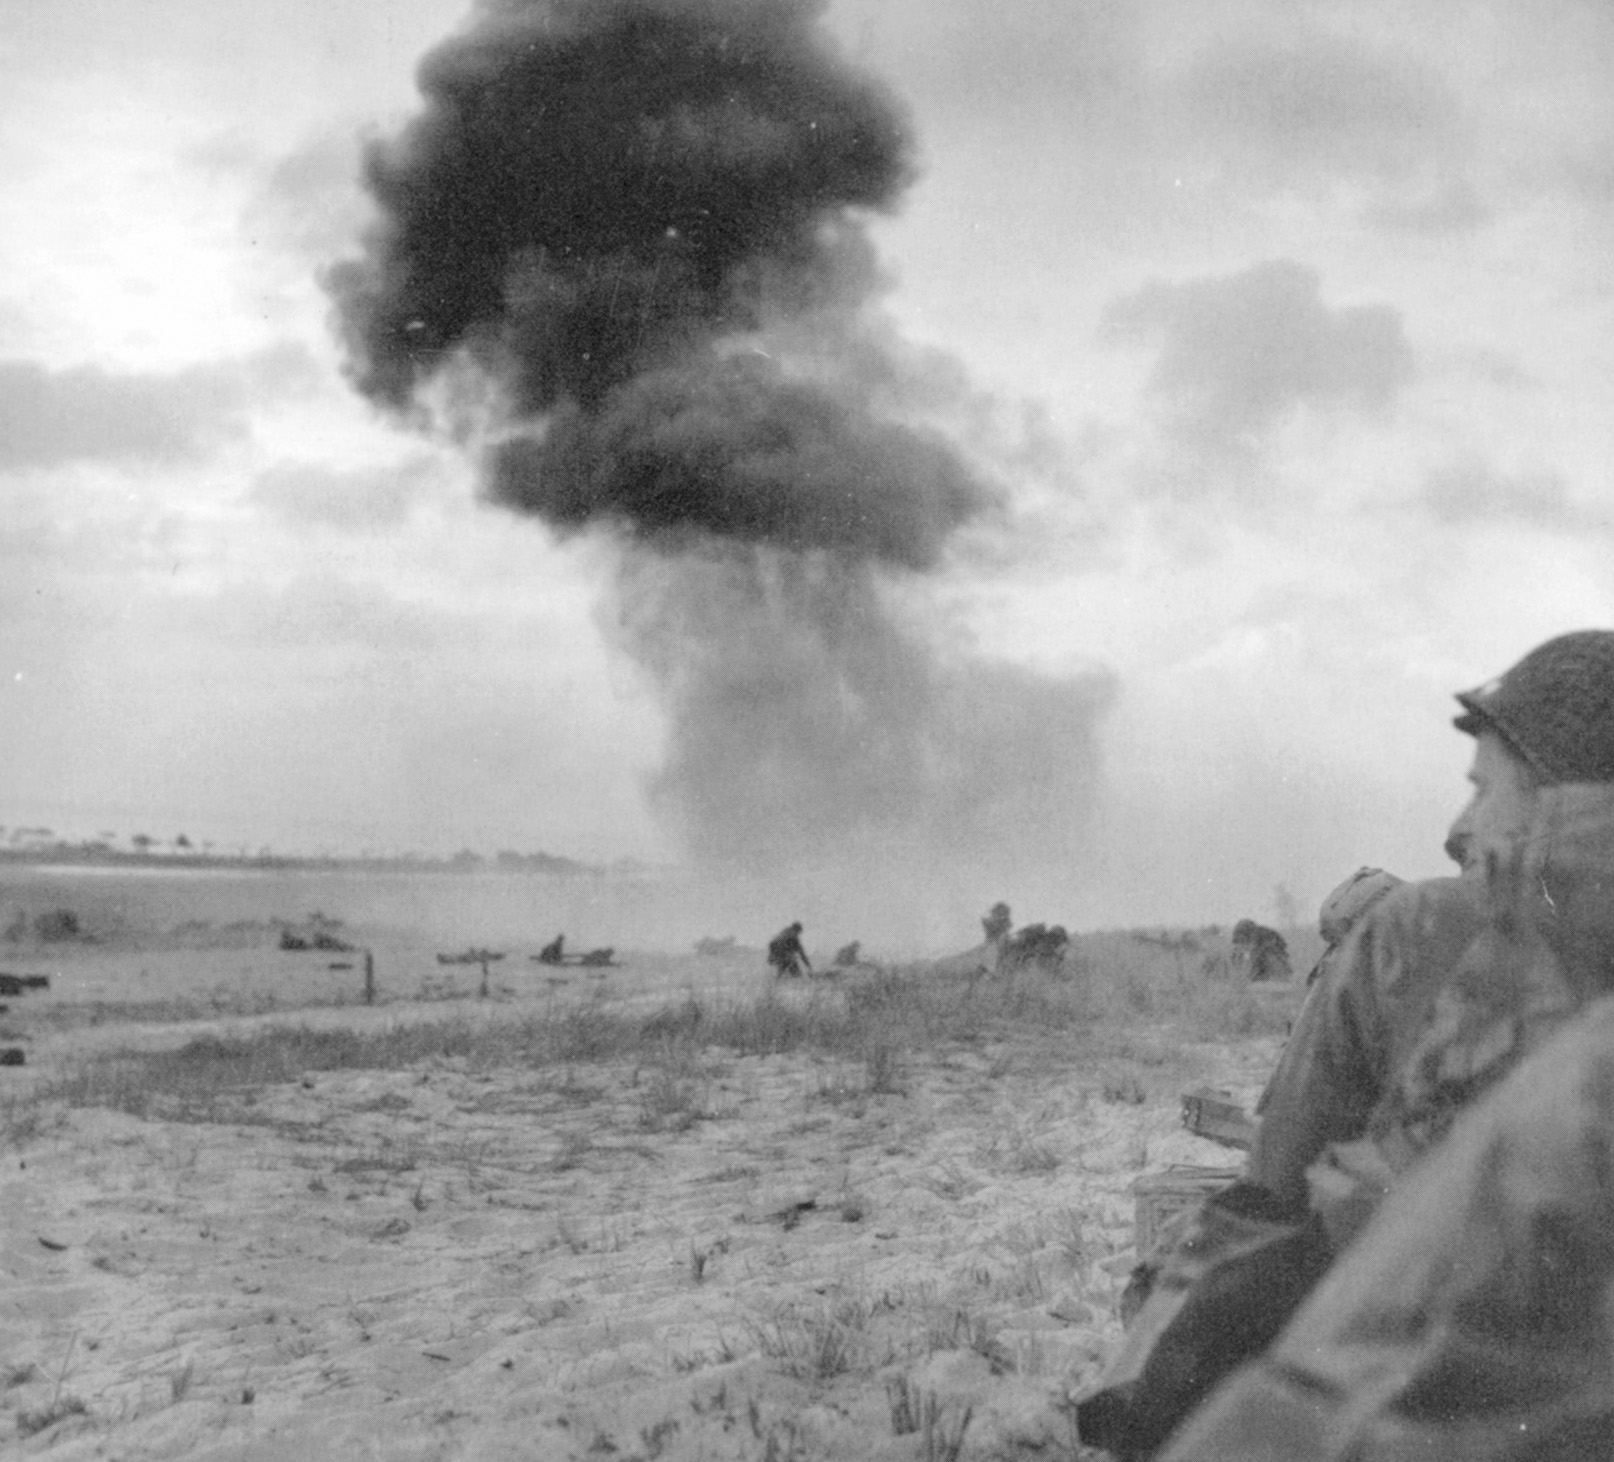  A soldier crouches for protection in the foreground while those in the distance scramble for cover as a German shell explodes on Omaha Beach.